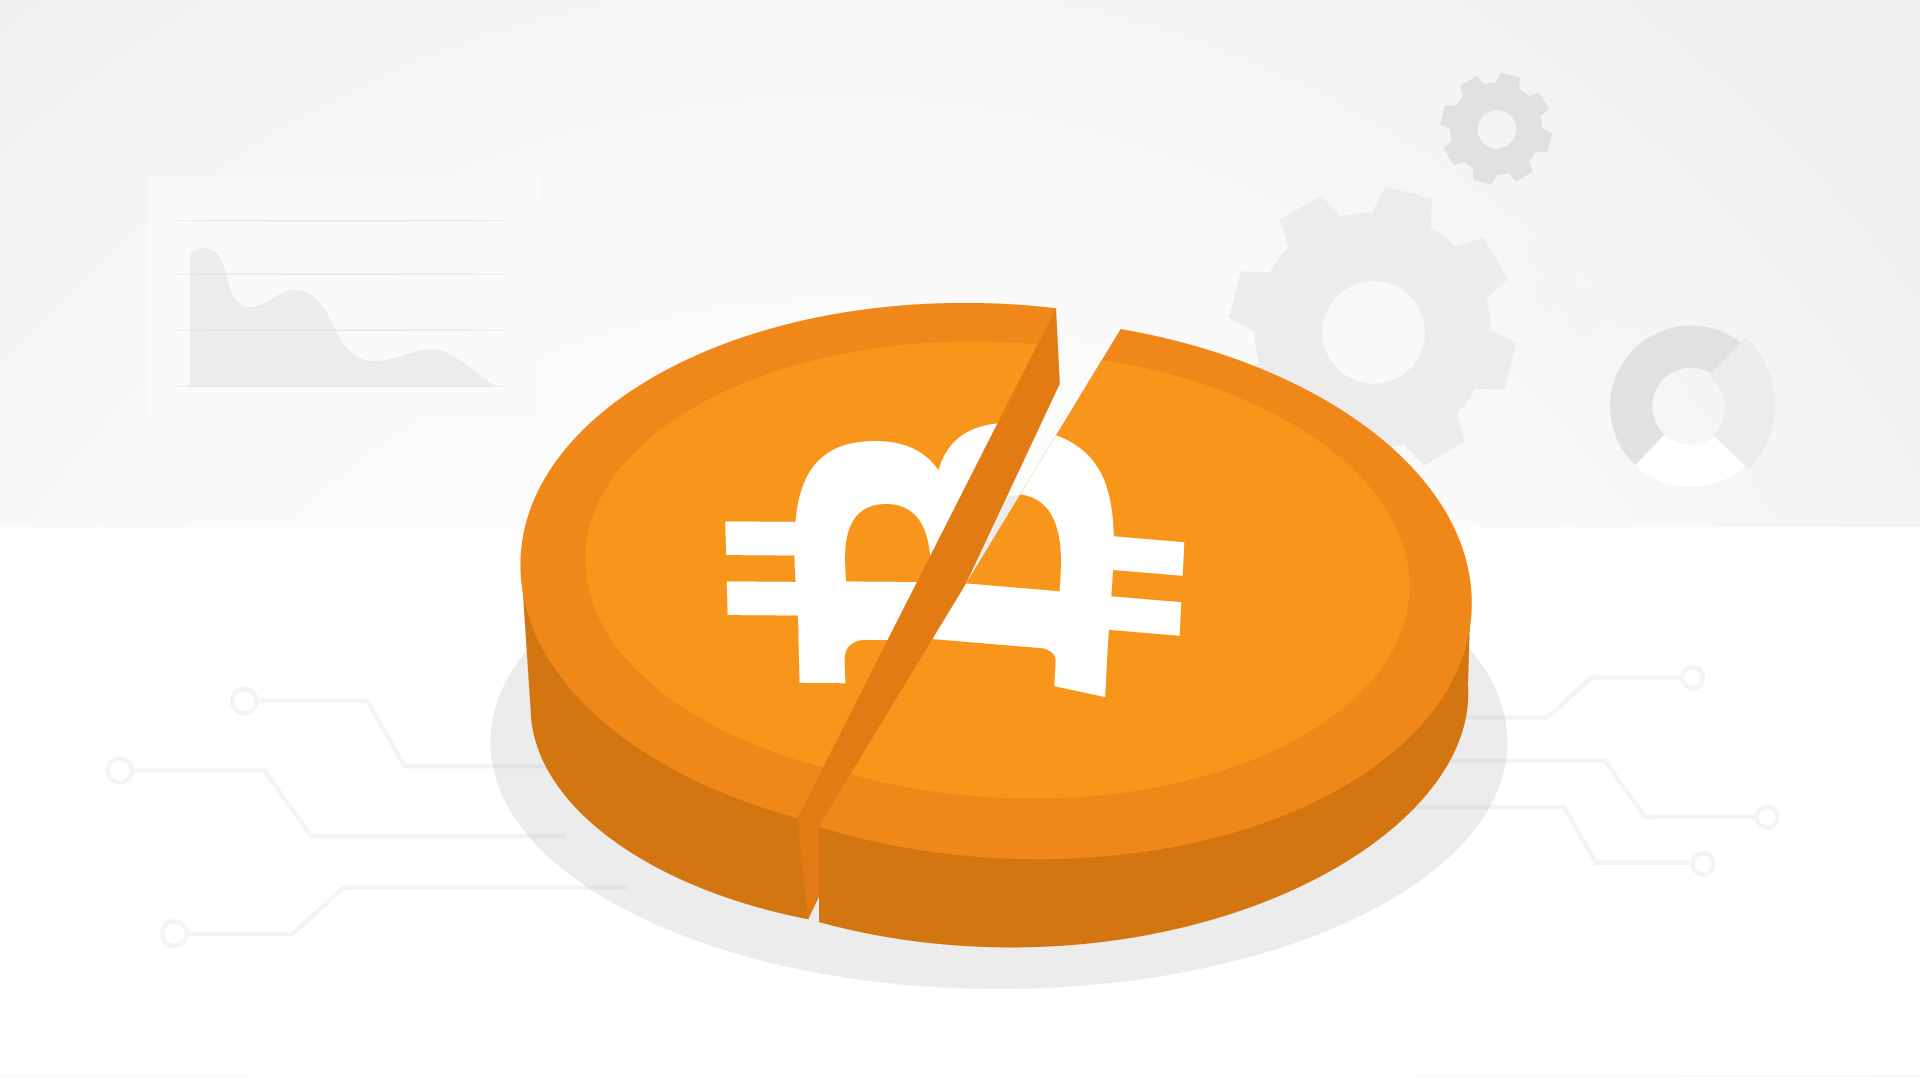 Bitcoin Halving: An Insight into Its Definition, Function, and Significance